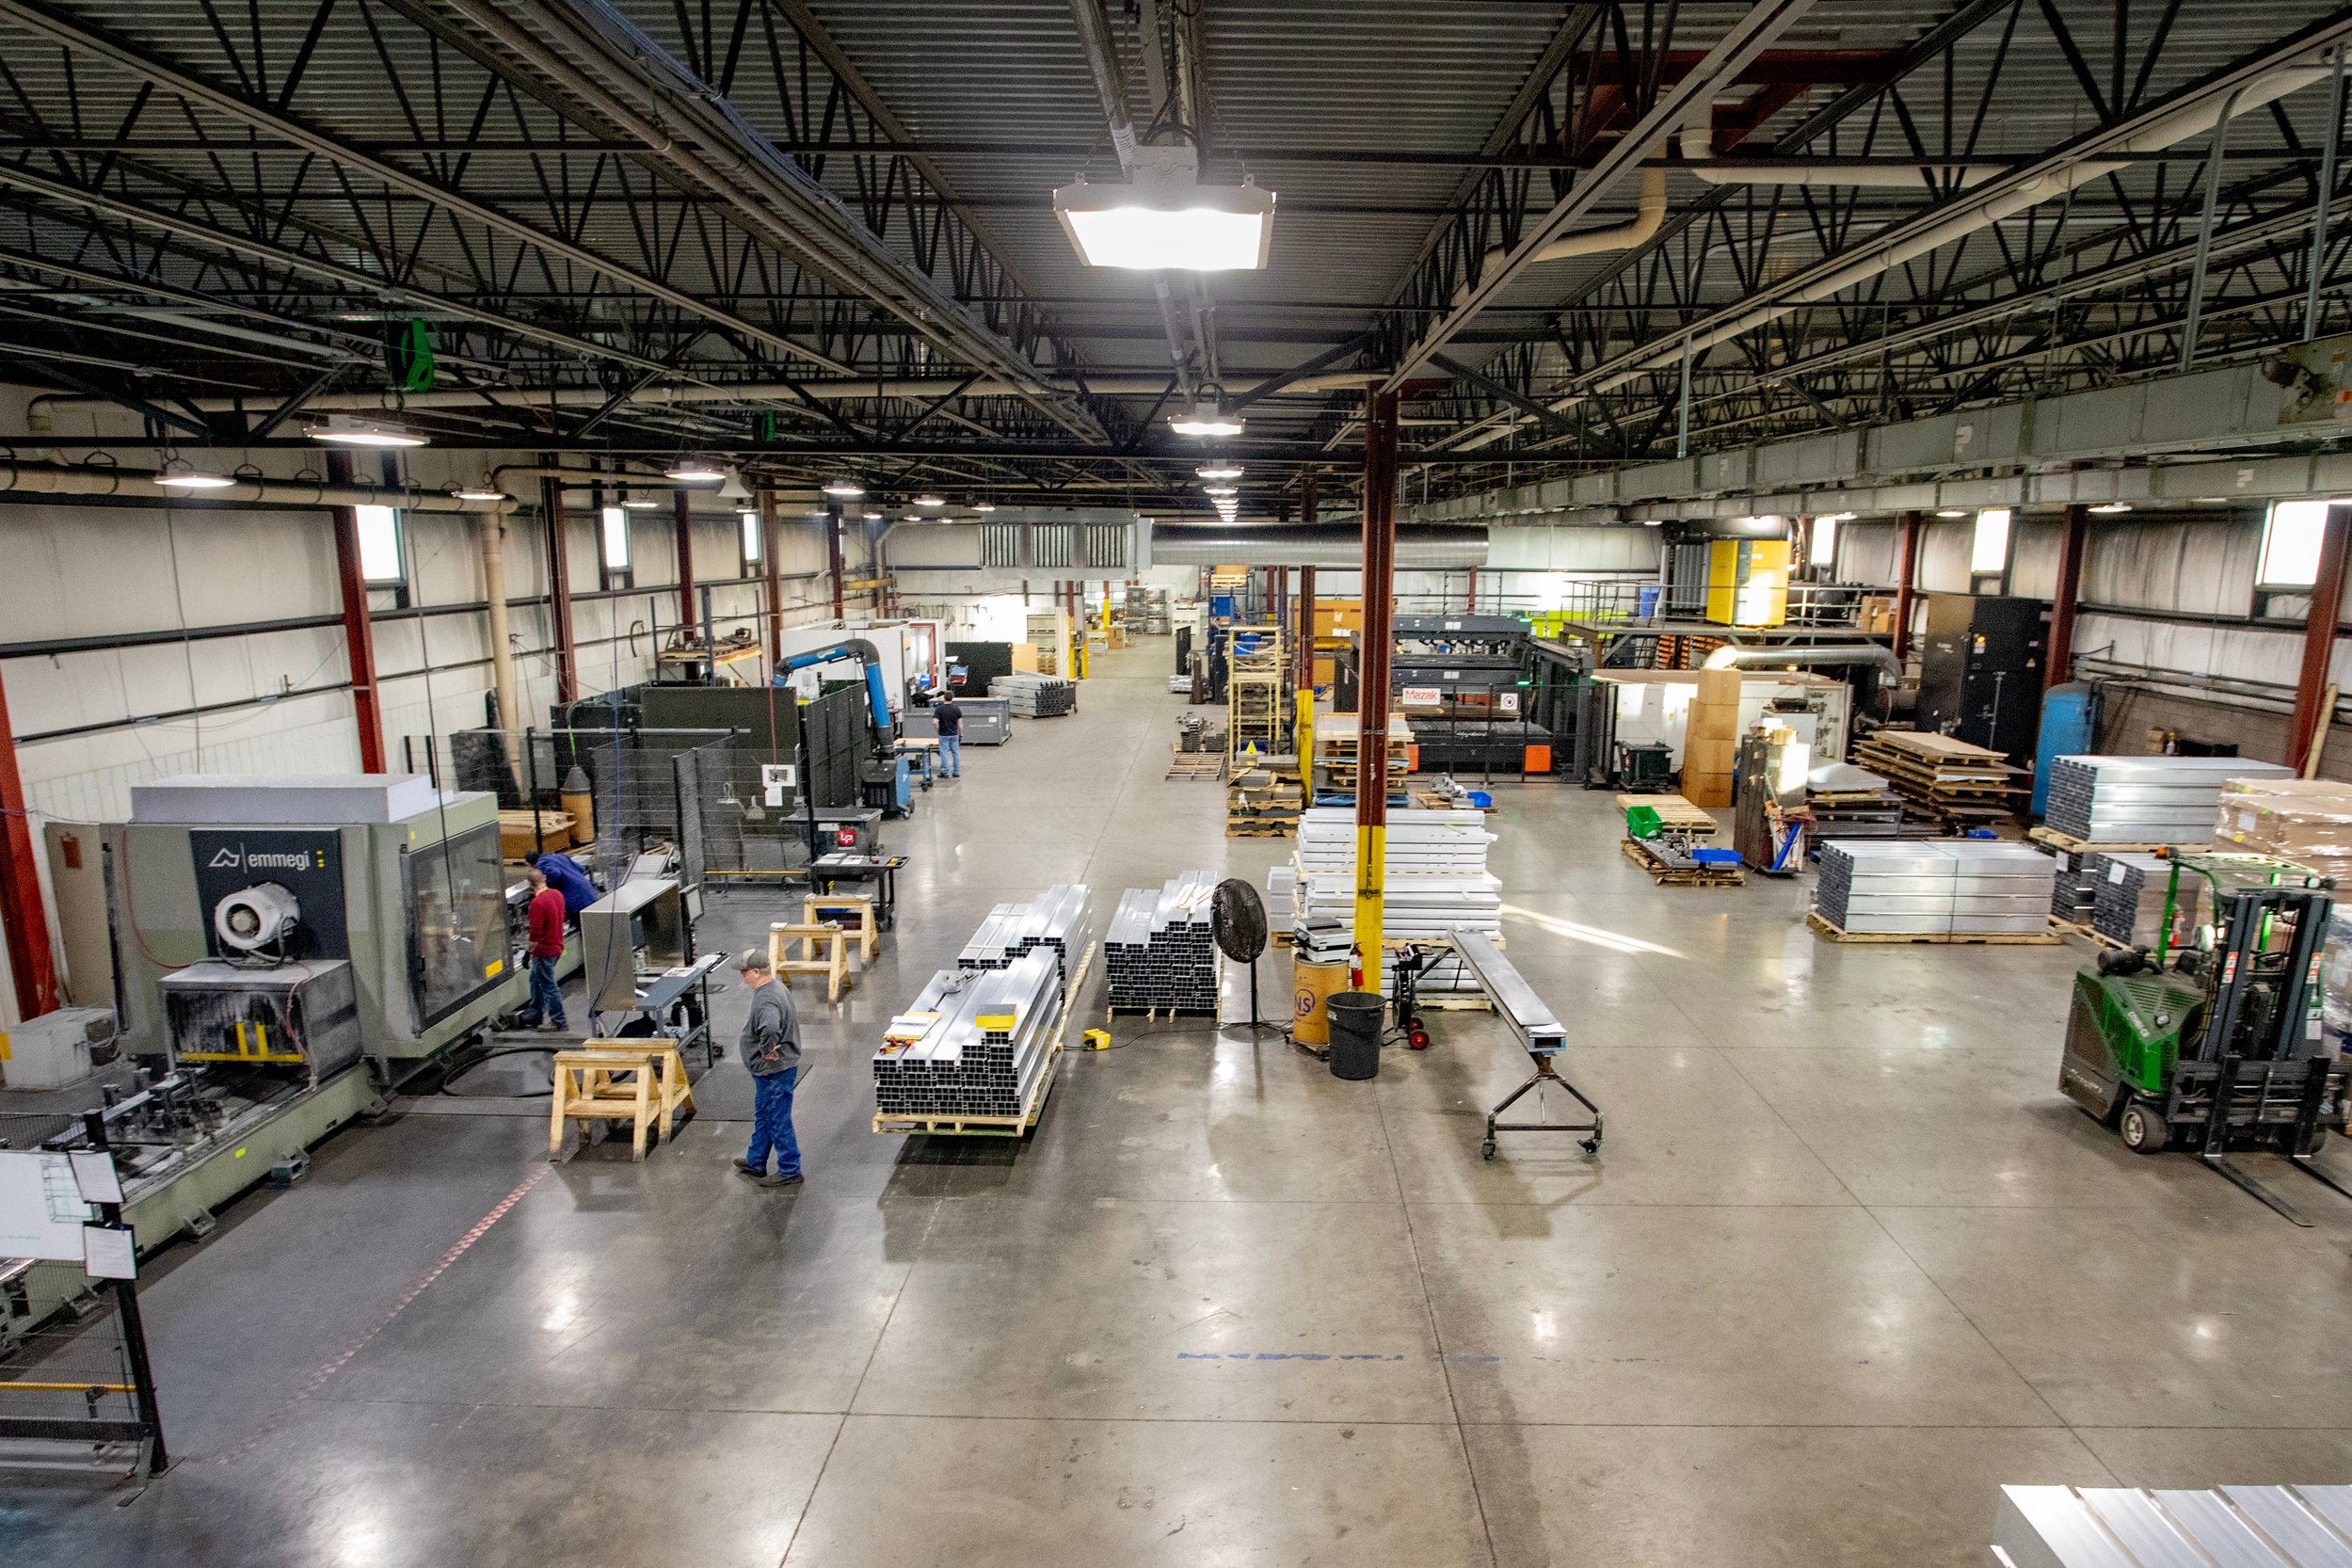 Legacy manufacturing software is hindering the growth of American manufacturing